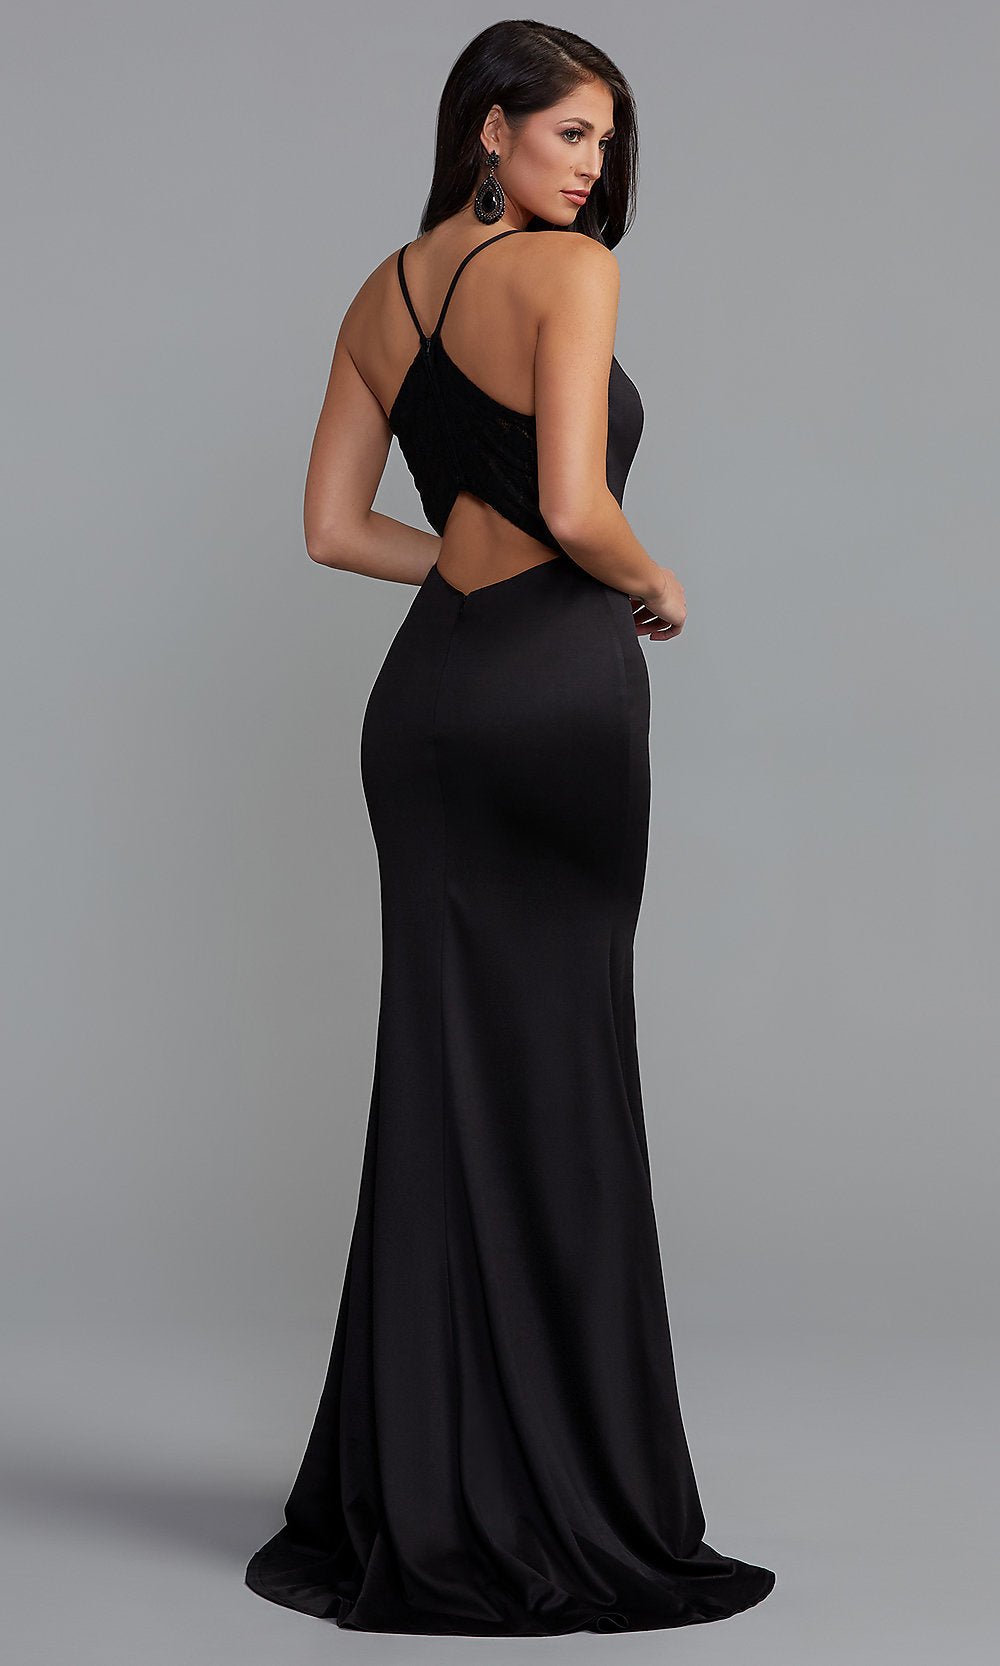  Long Black Formal Prom Dress with Lace Back